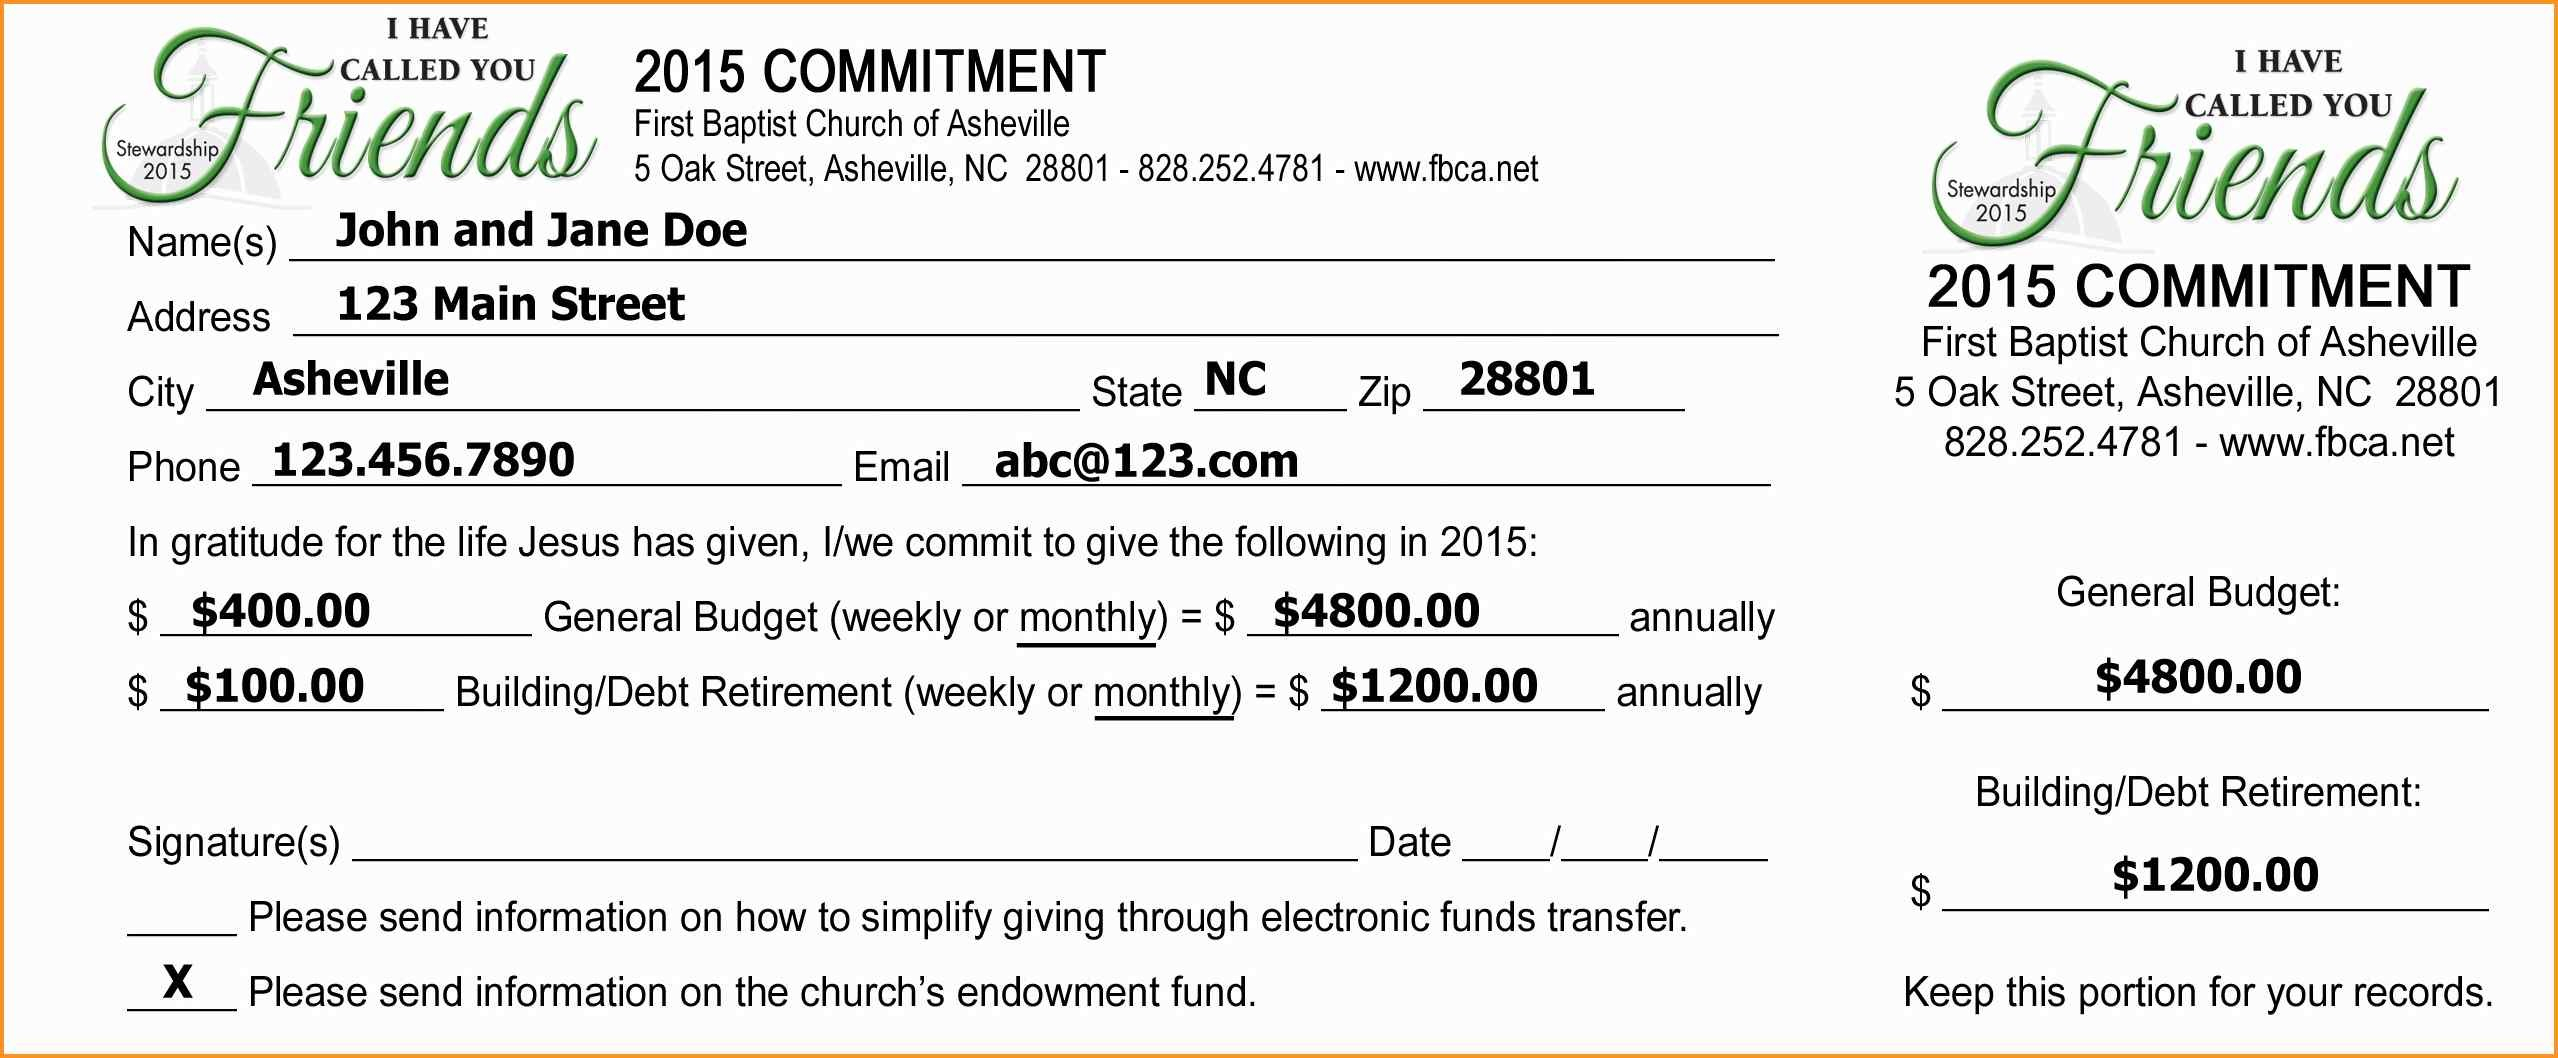 Pledge Cards Template Free Card Donation Excel Templates For Throughout Pledge Card Template For Church